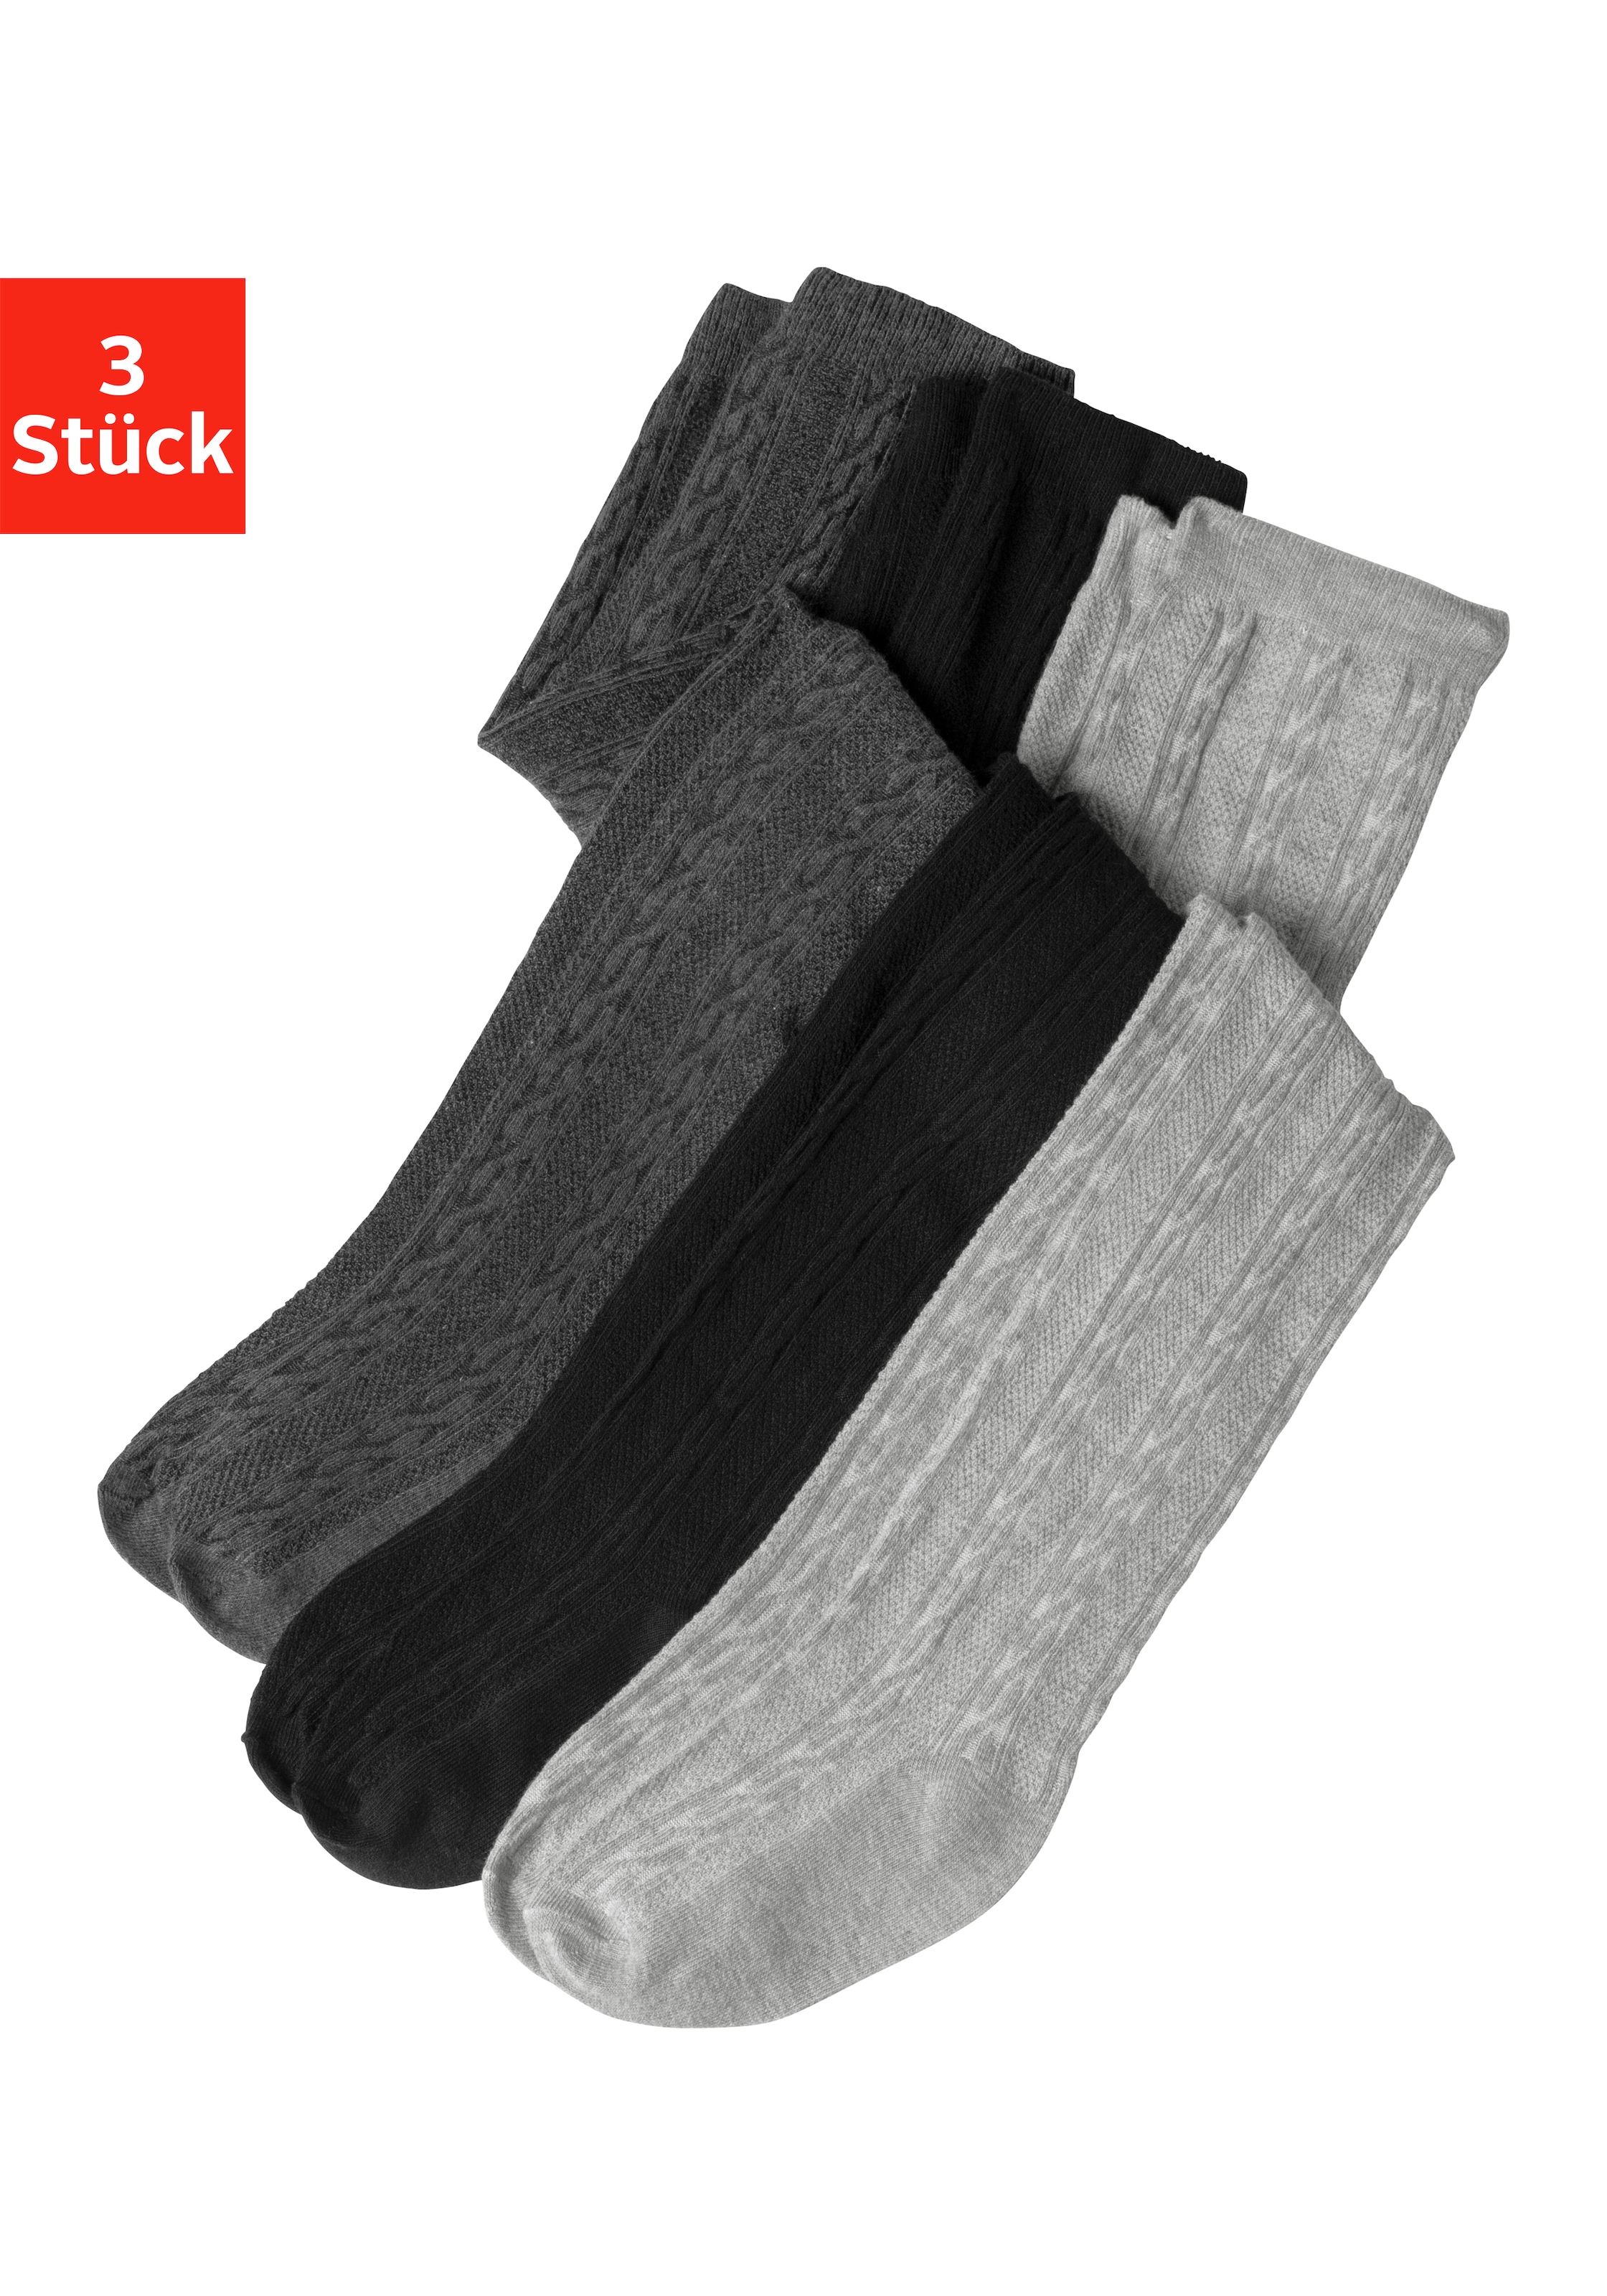 H.I.S Strumpfhose, (Packung, 3 St.), mit Zopfmuster bei ♕